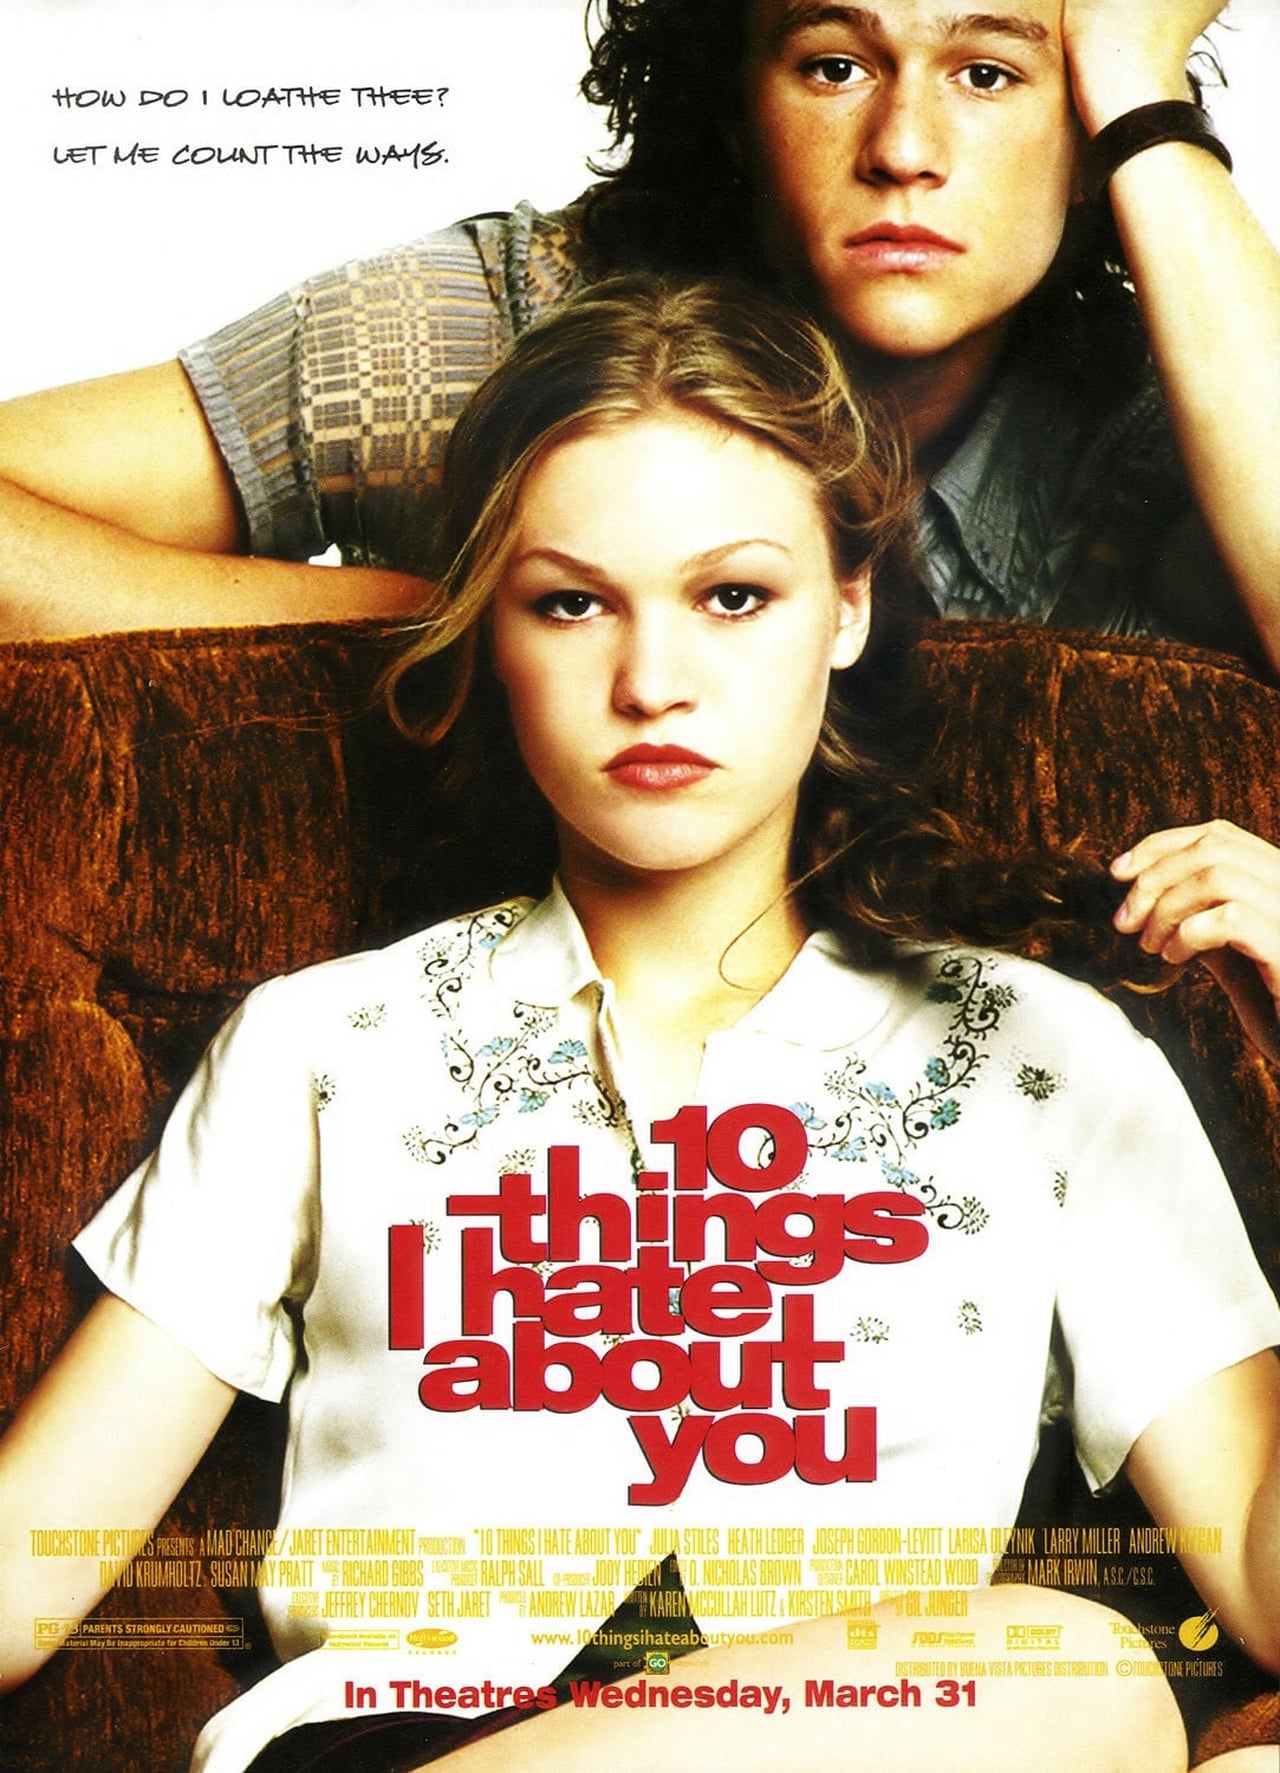 10 Things I Hate About You (1999) 256Kbps 23.976Fps 48Khz 5.1Ch Disney+ DD+ E-AC3 Turkish Audio TAC